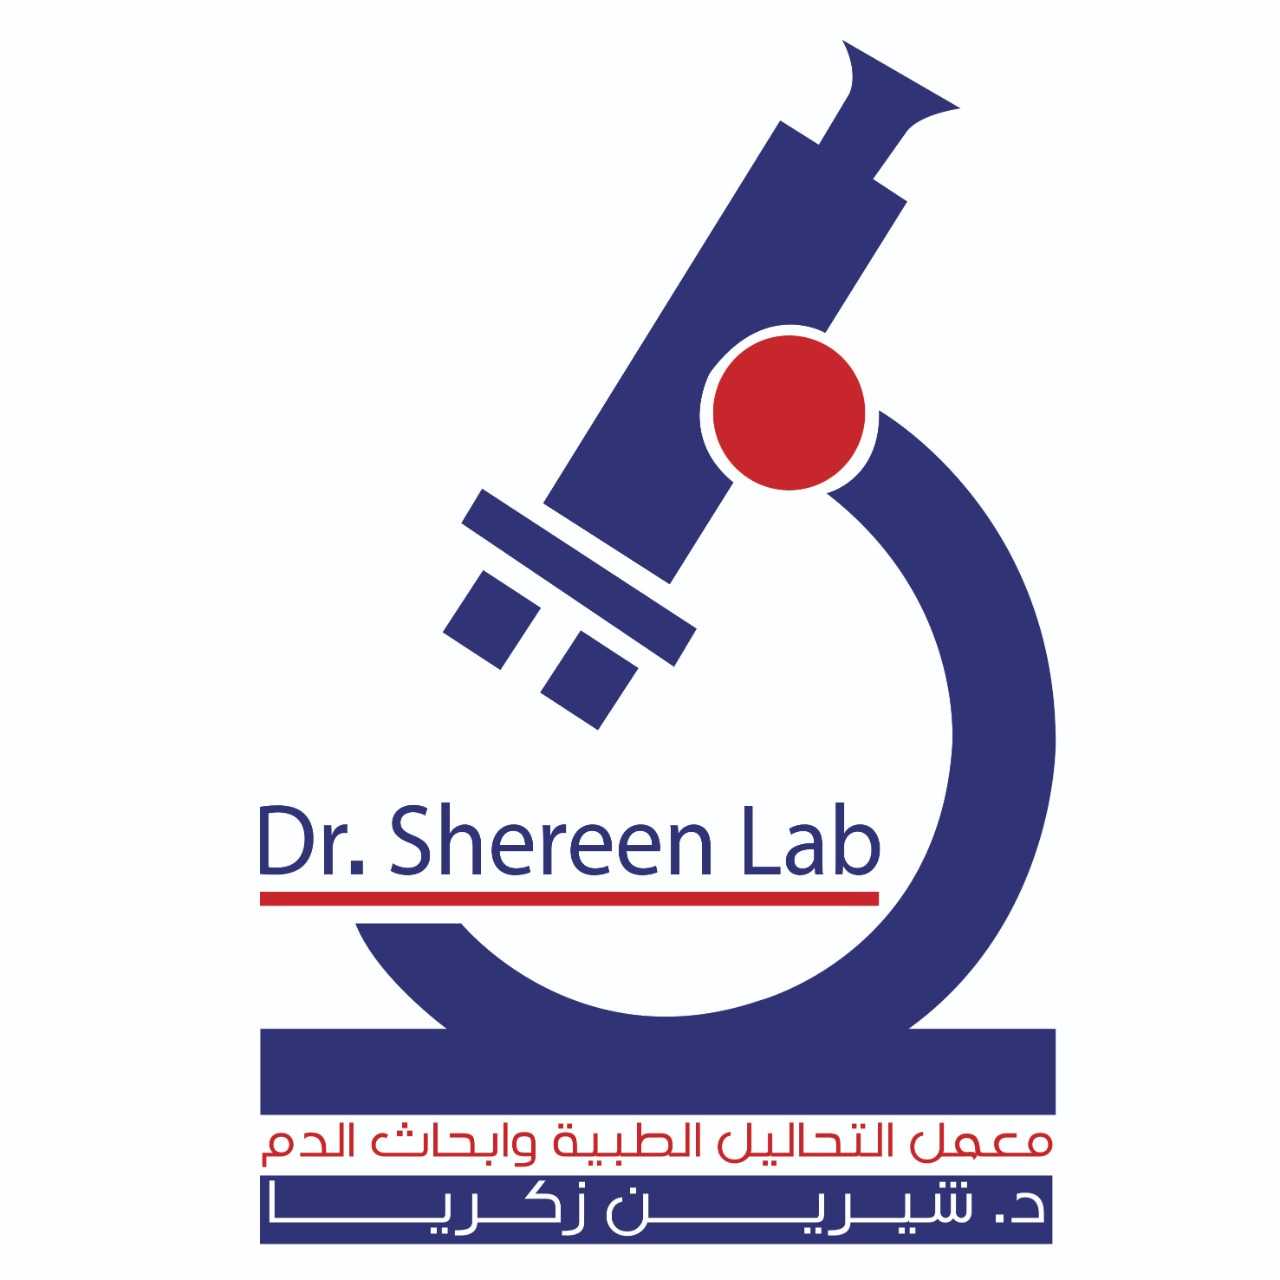 Dr. Shereen Lab For medical analysis